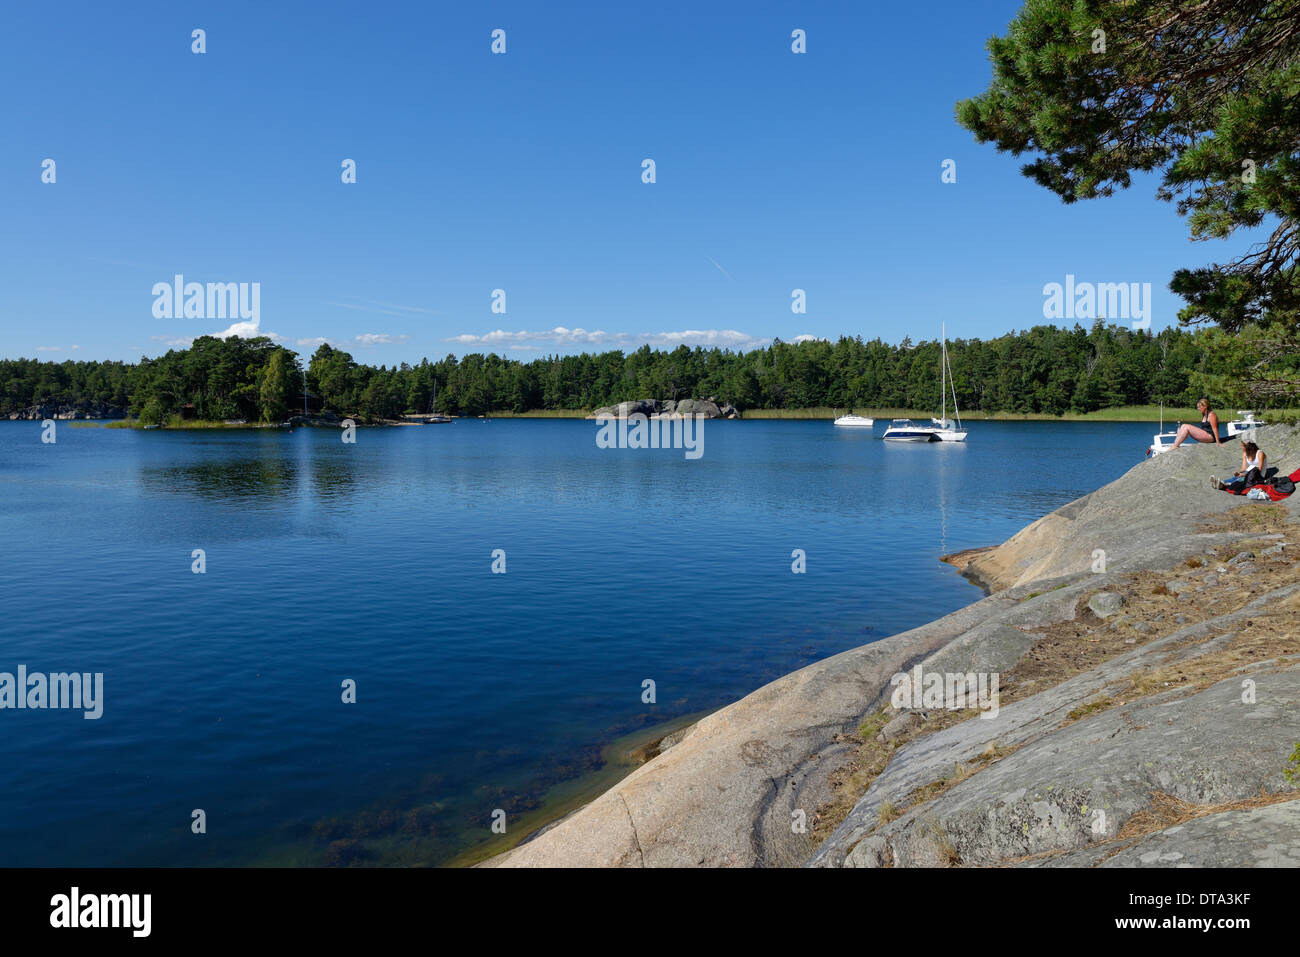 Typical round polished rocks, roches moutonnées, on Finnhamn Island in the Stockholm Middle Archipelago, Stockholm, Sweden Stock Photo